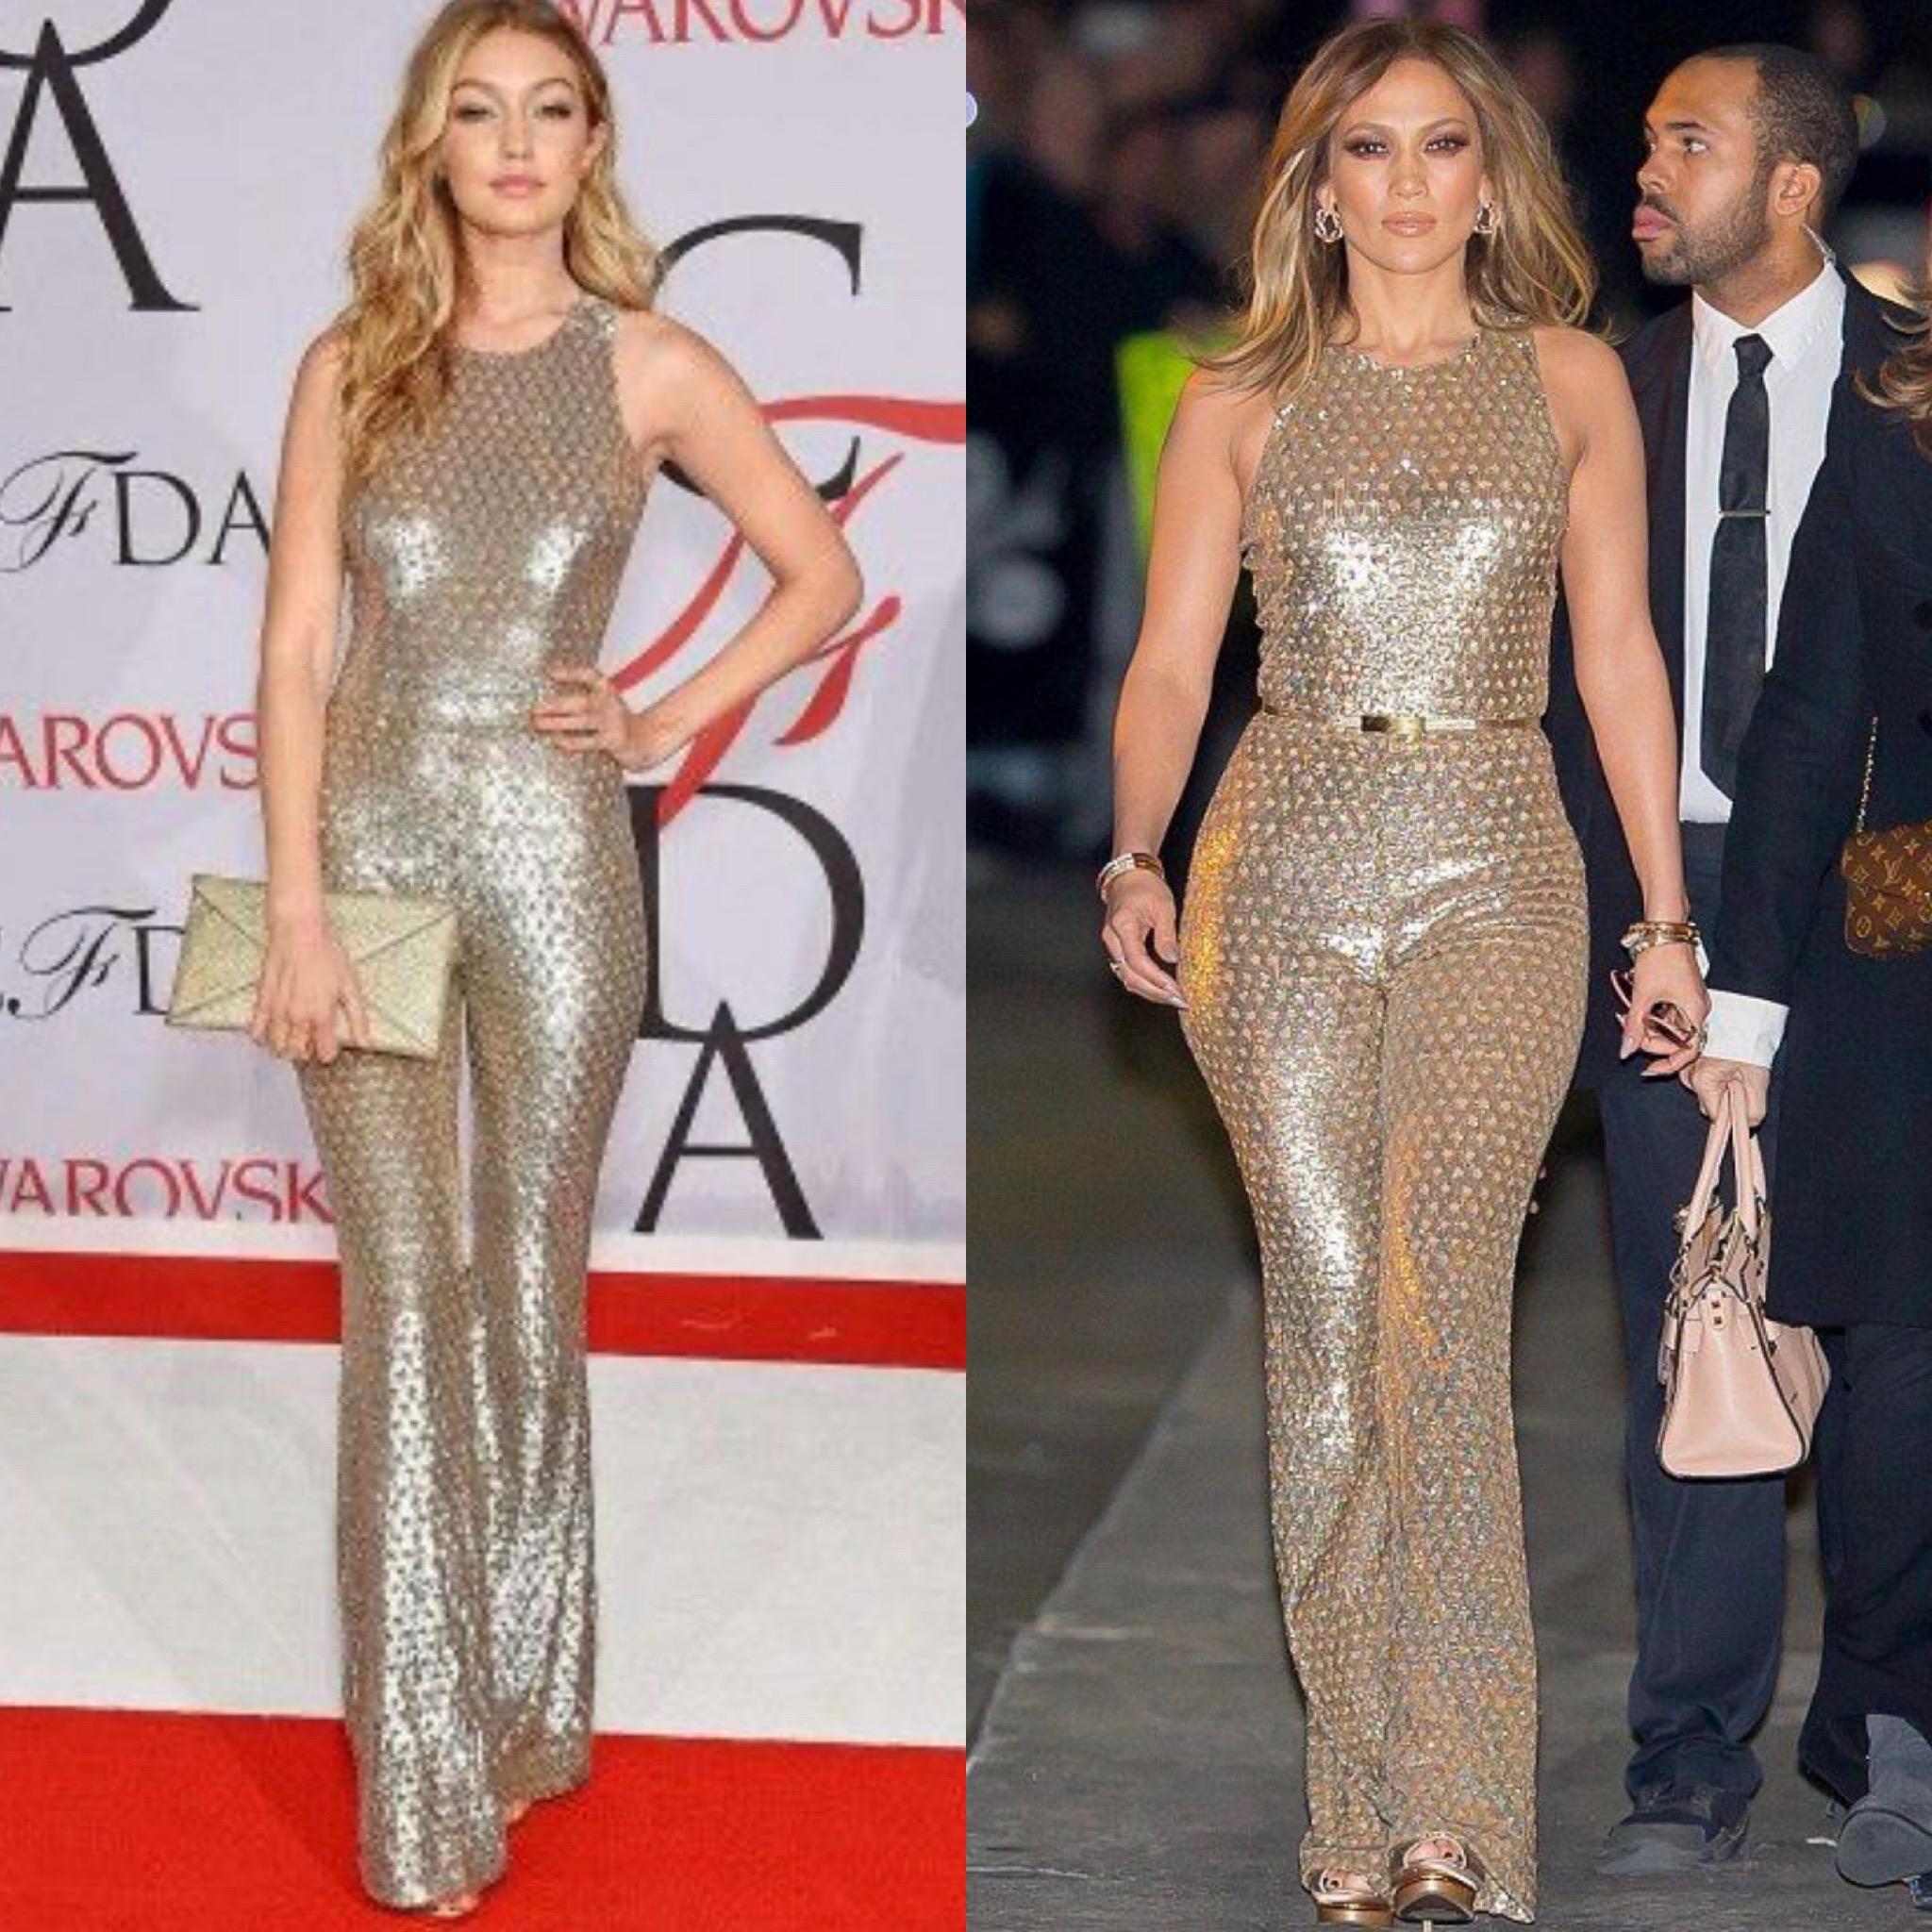 Michael Kors Collection 2015 Gold Sequin Jumpsuit.
As seen on J Lo and Gigi
Size 6
Bust 36